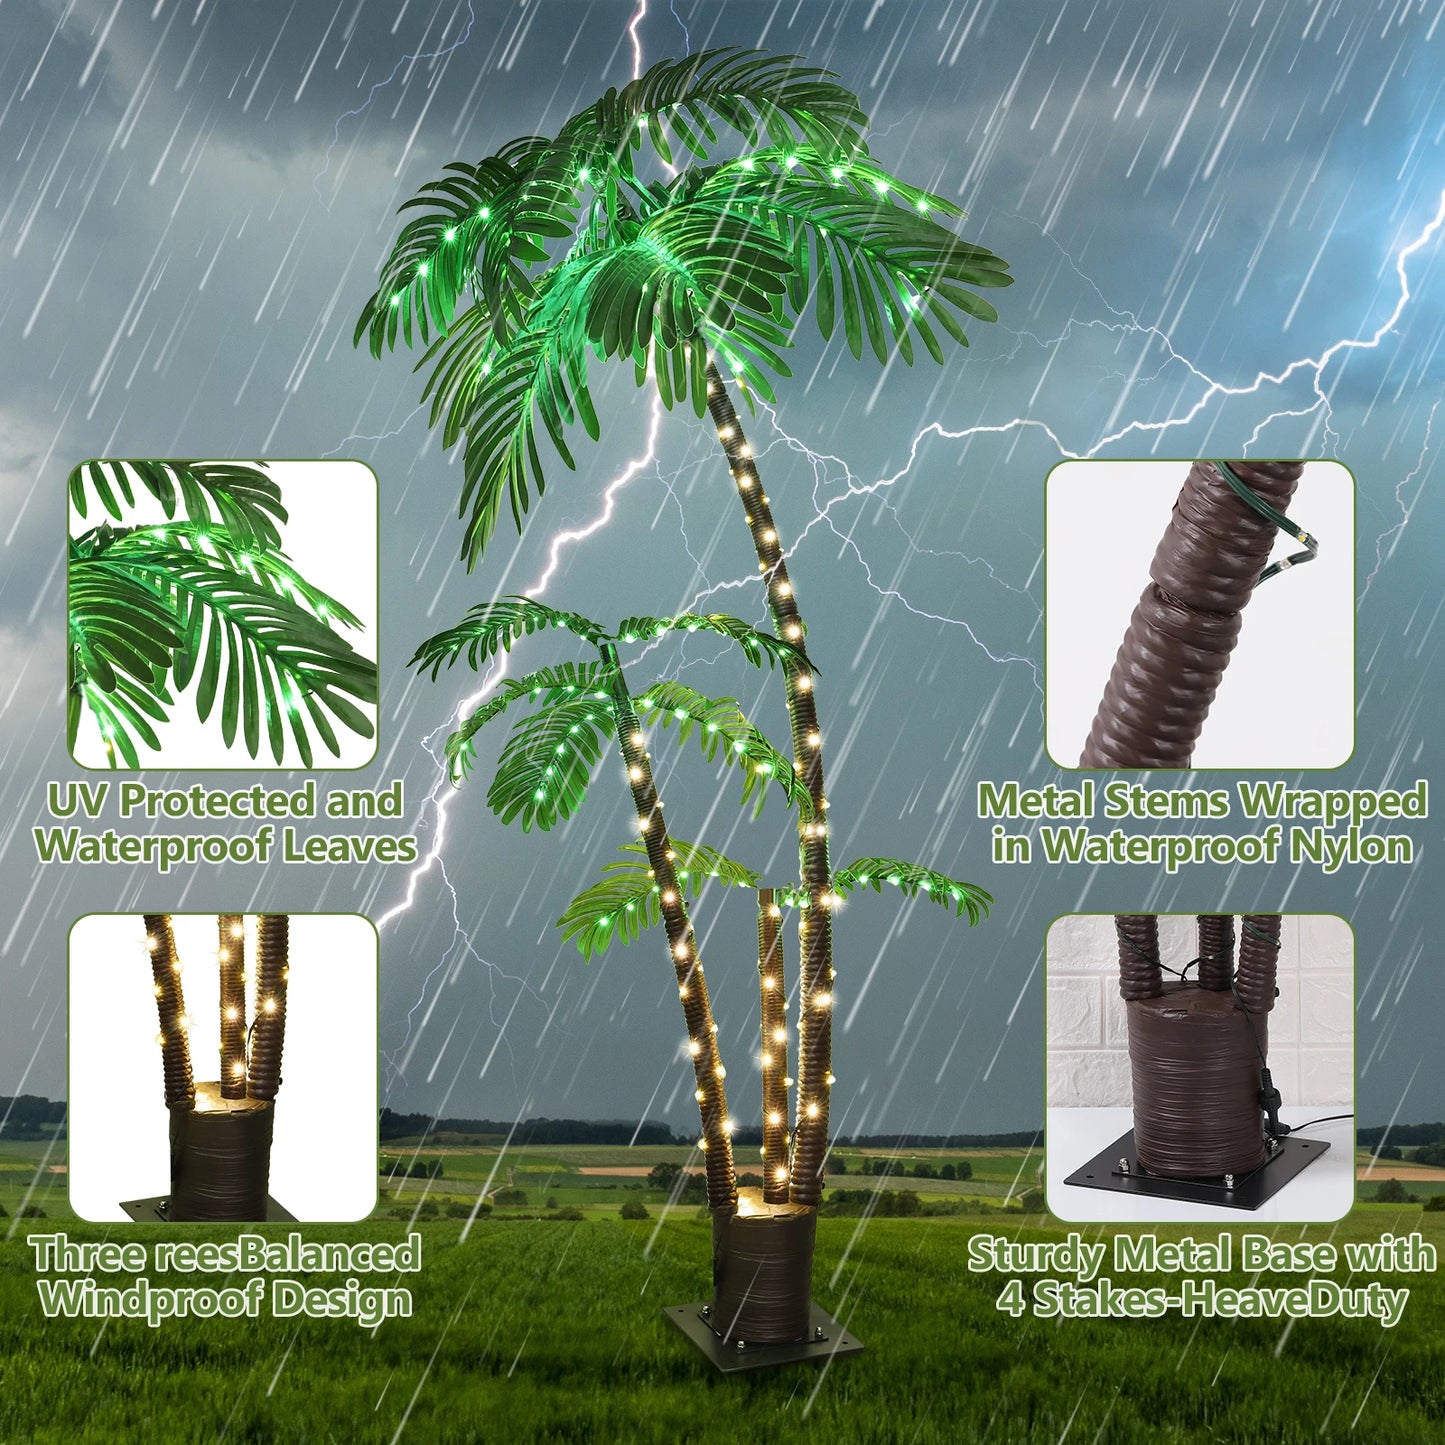 6ft Solar Lighted Palm Tree LED Artificial Palm Tree